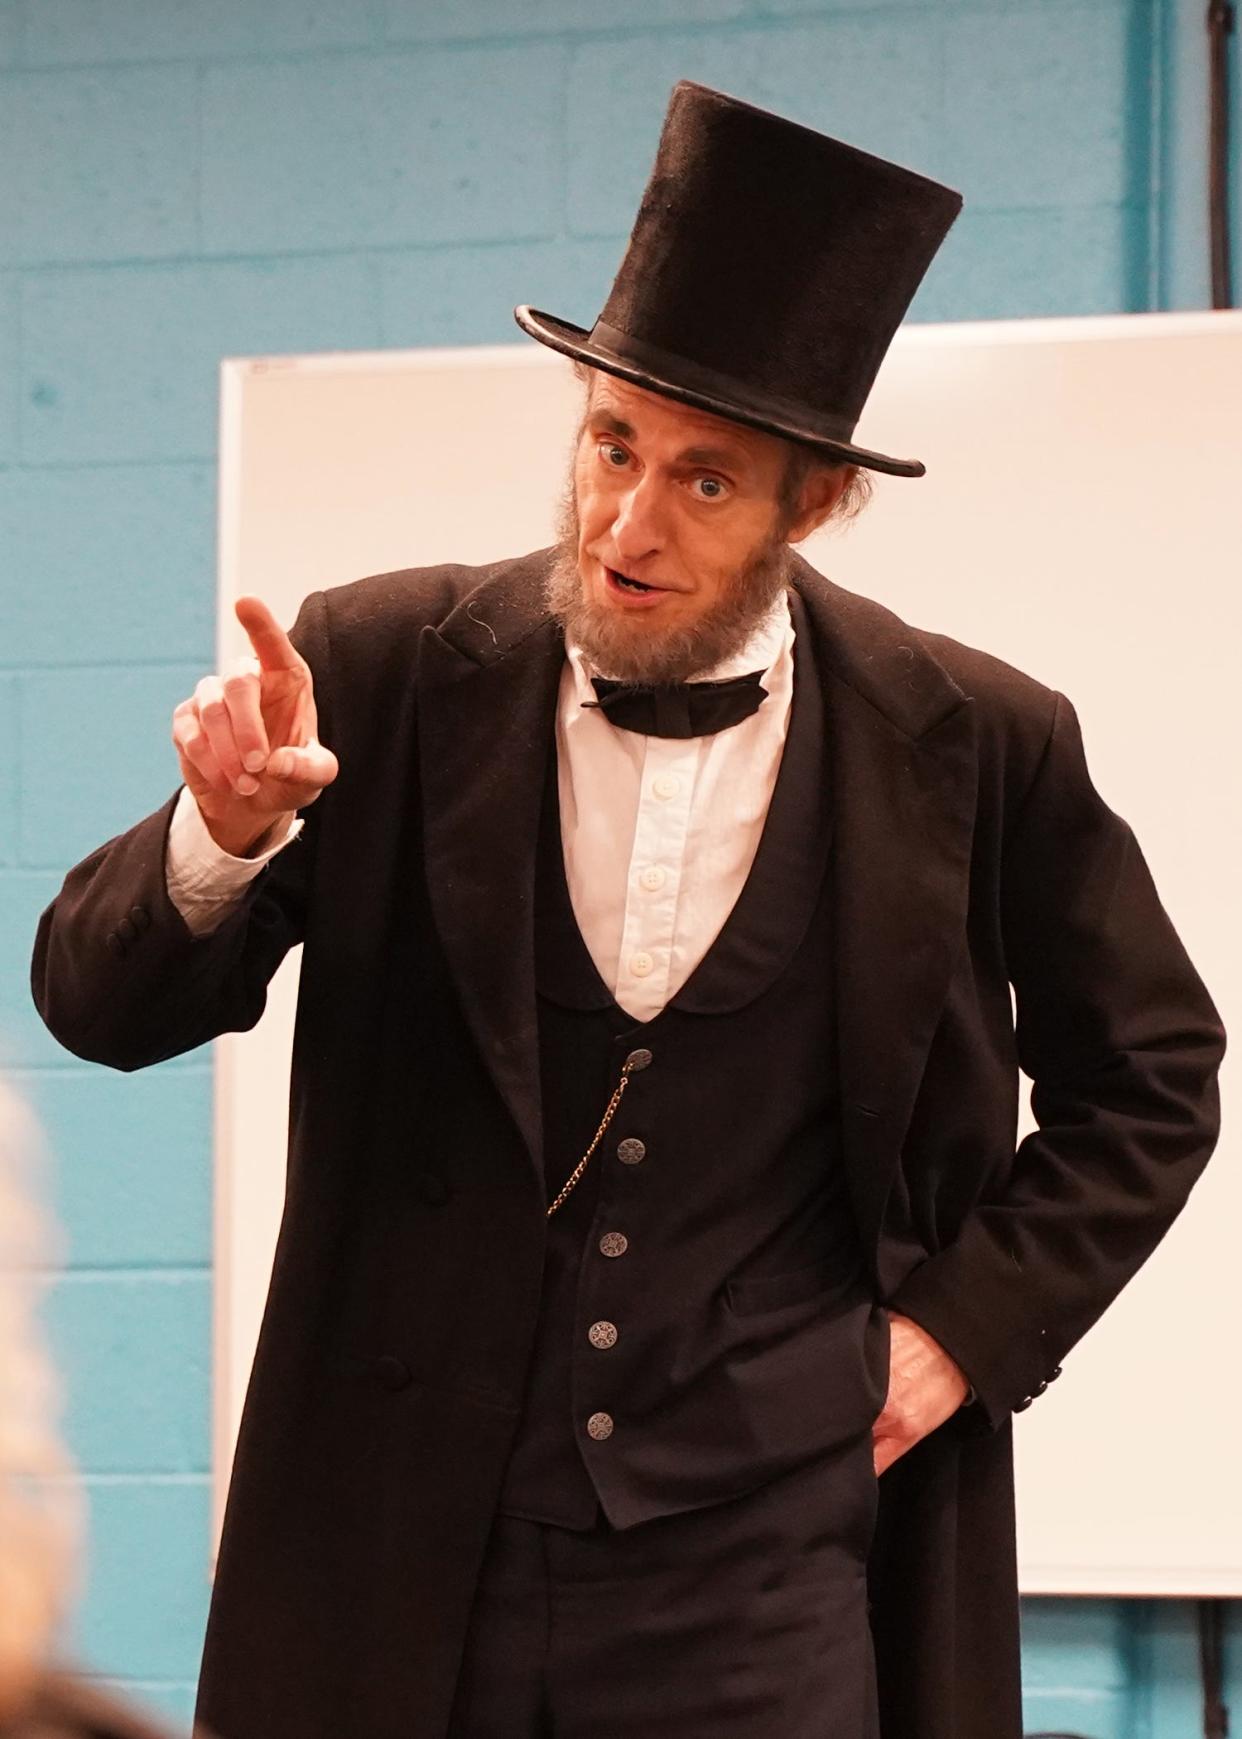 Abraham Lincoln impersonator Kevin Wood, of Adrian appeared March 30, 2023, as the former president of the United States during a historical talk and visit at the main branch of the Lenawee District Library in Adrian.